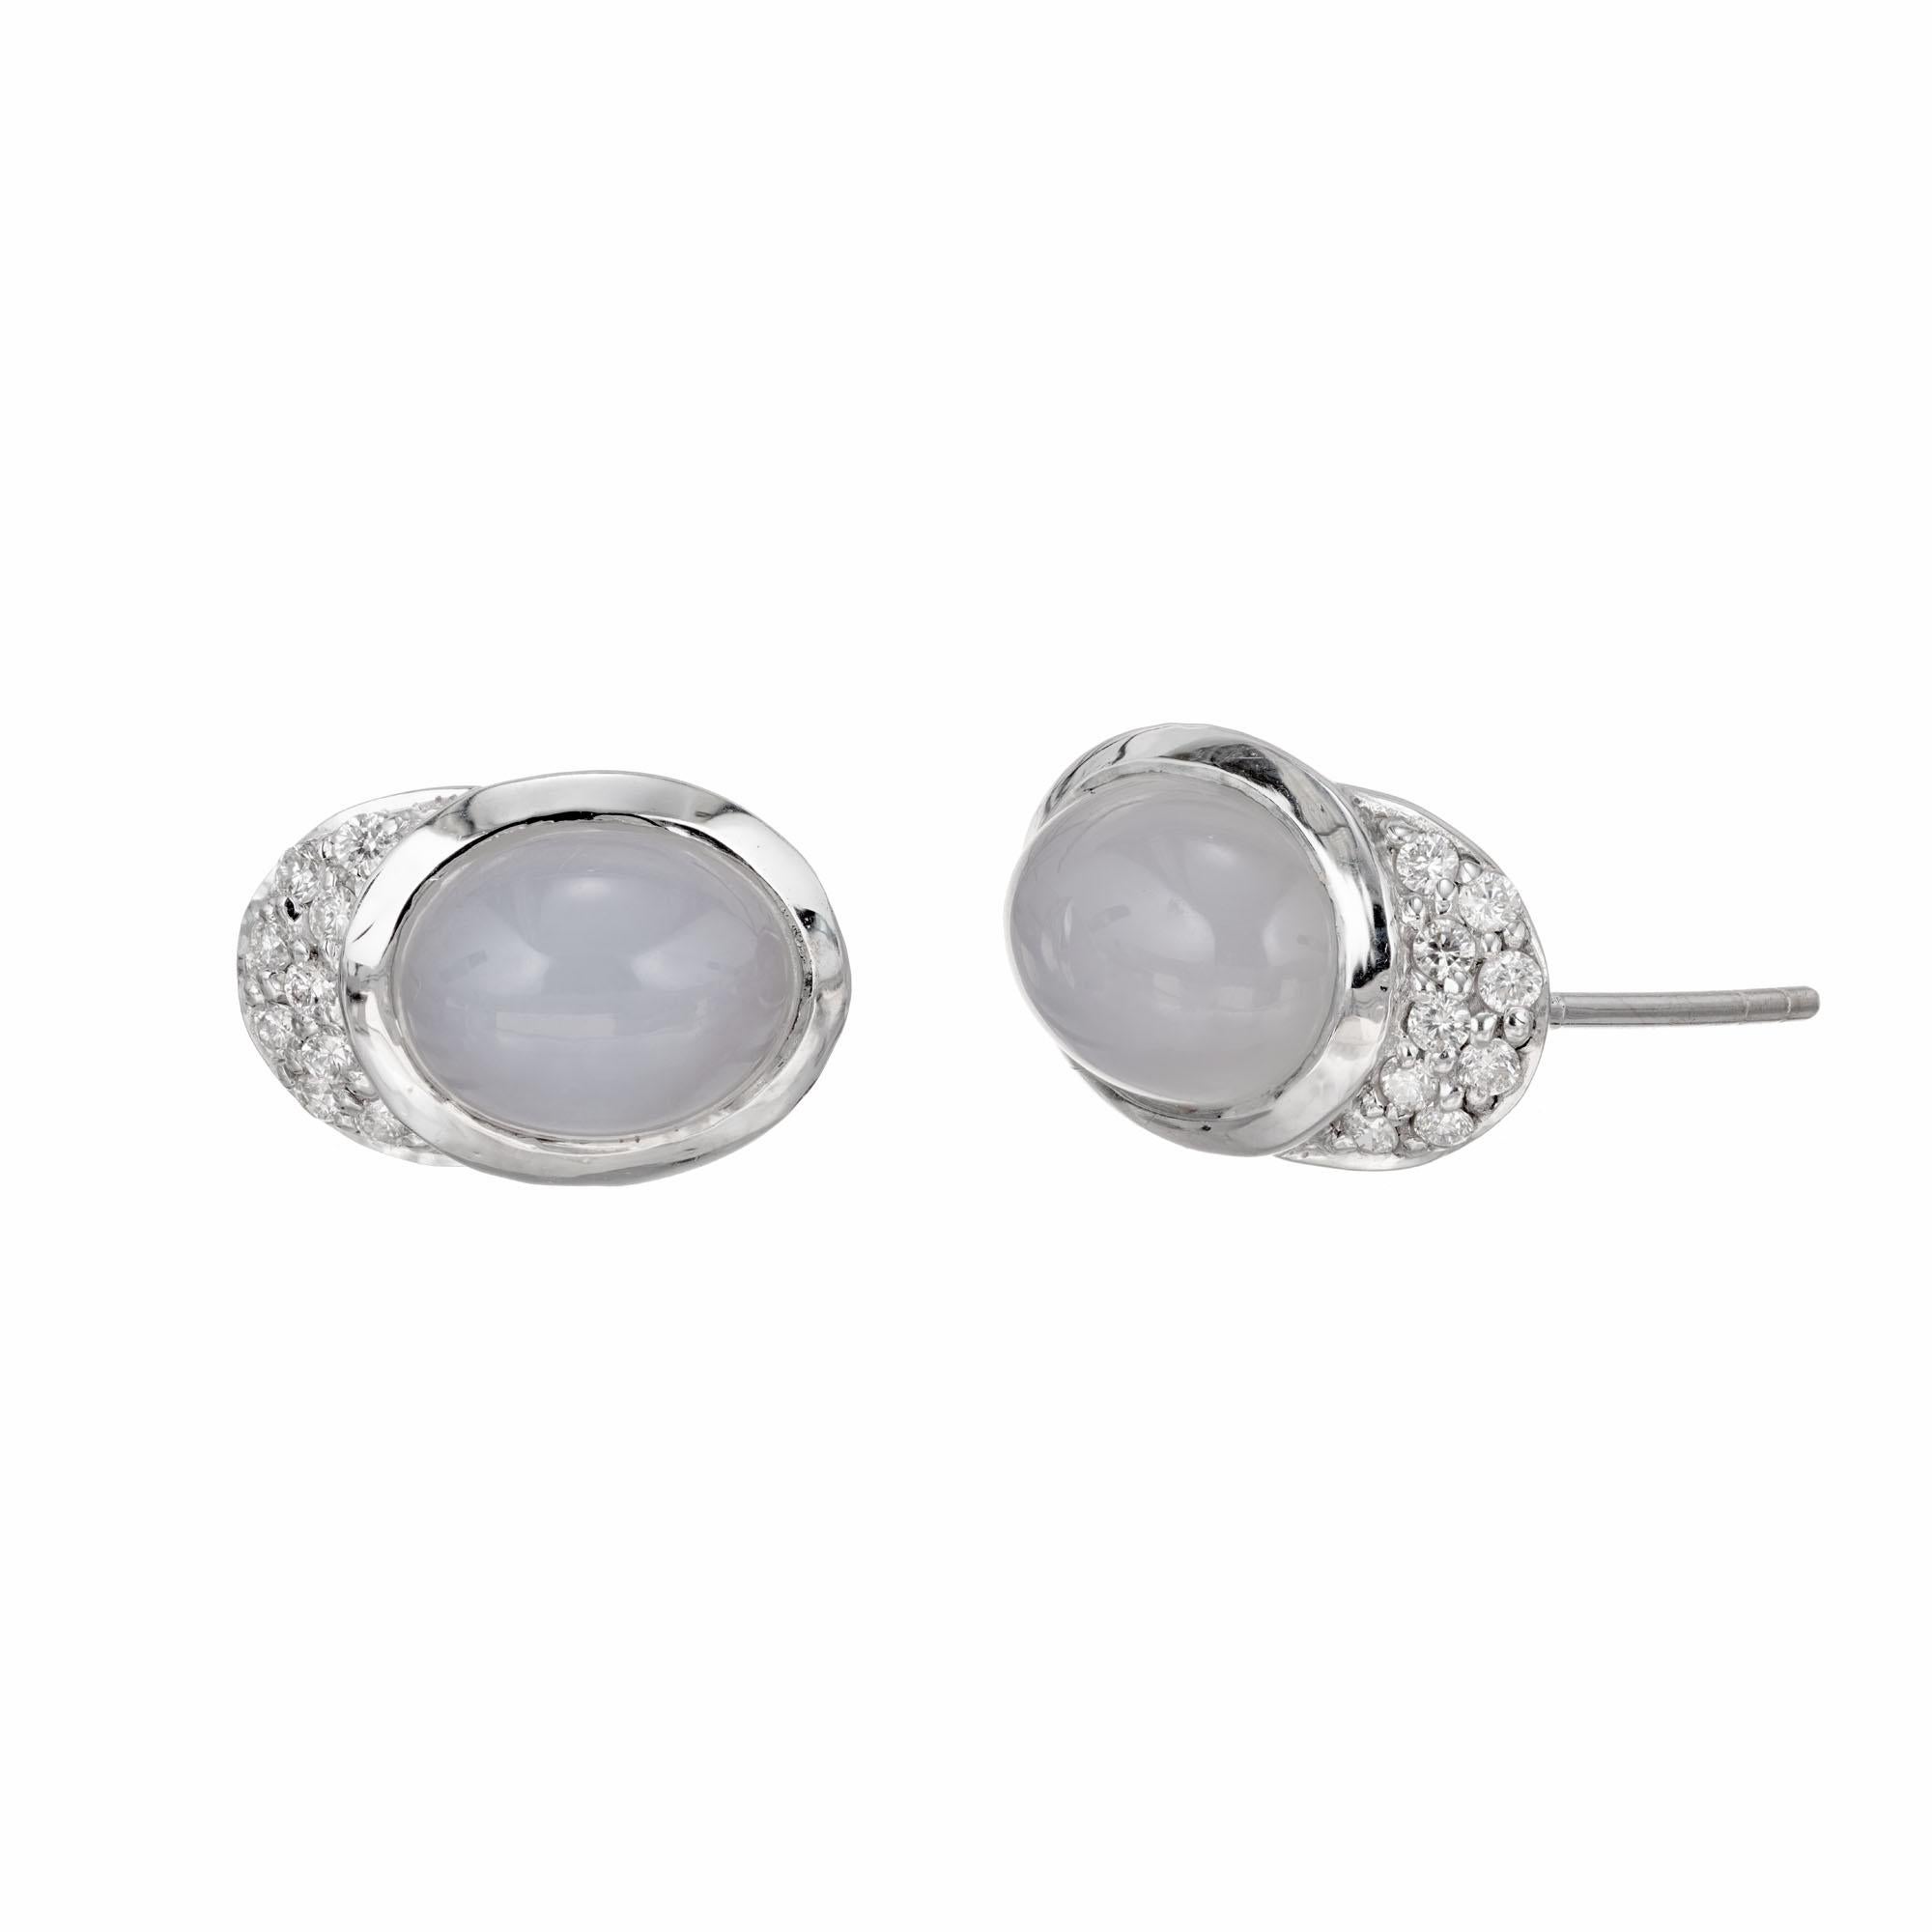 Translucent blue oval cabochon Chalcedony and diamond earrings in 18k white gold.

2 natural cabochon translucent blue Chalcedony, approx. total weight 4.00cts, 10 x 8mm
18 round full cut diamonds, approx. total weight .28cts, F to G, VS
Stamped